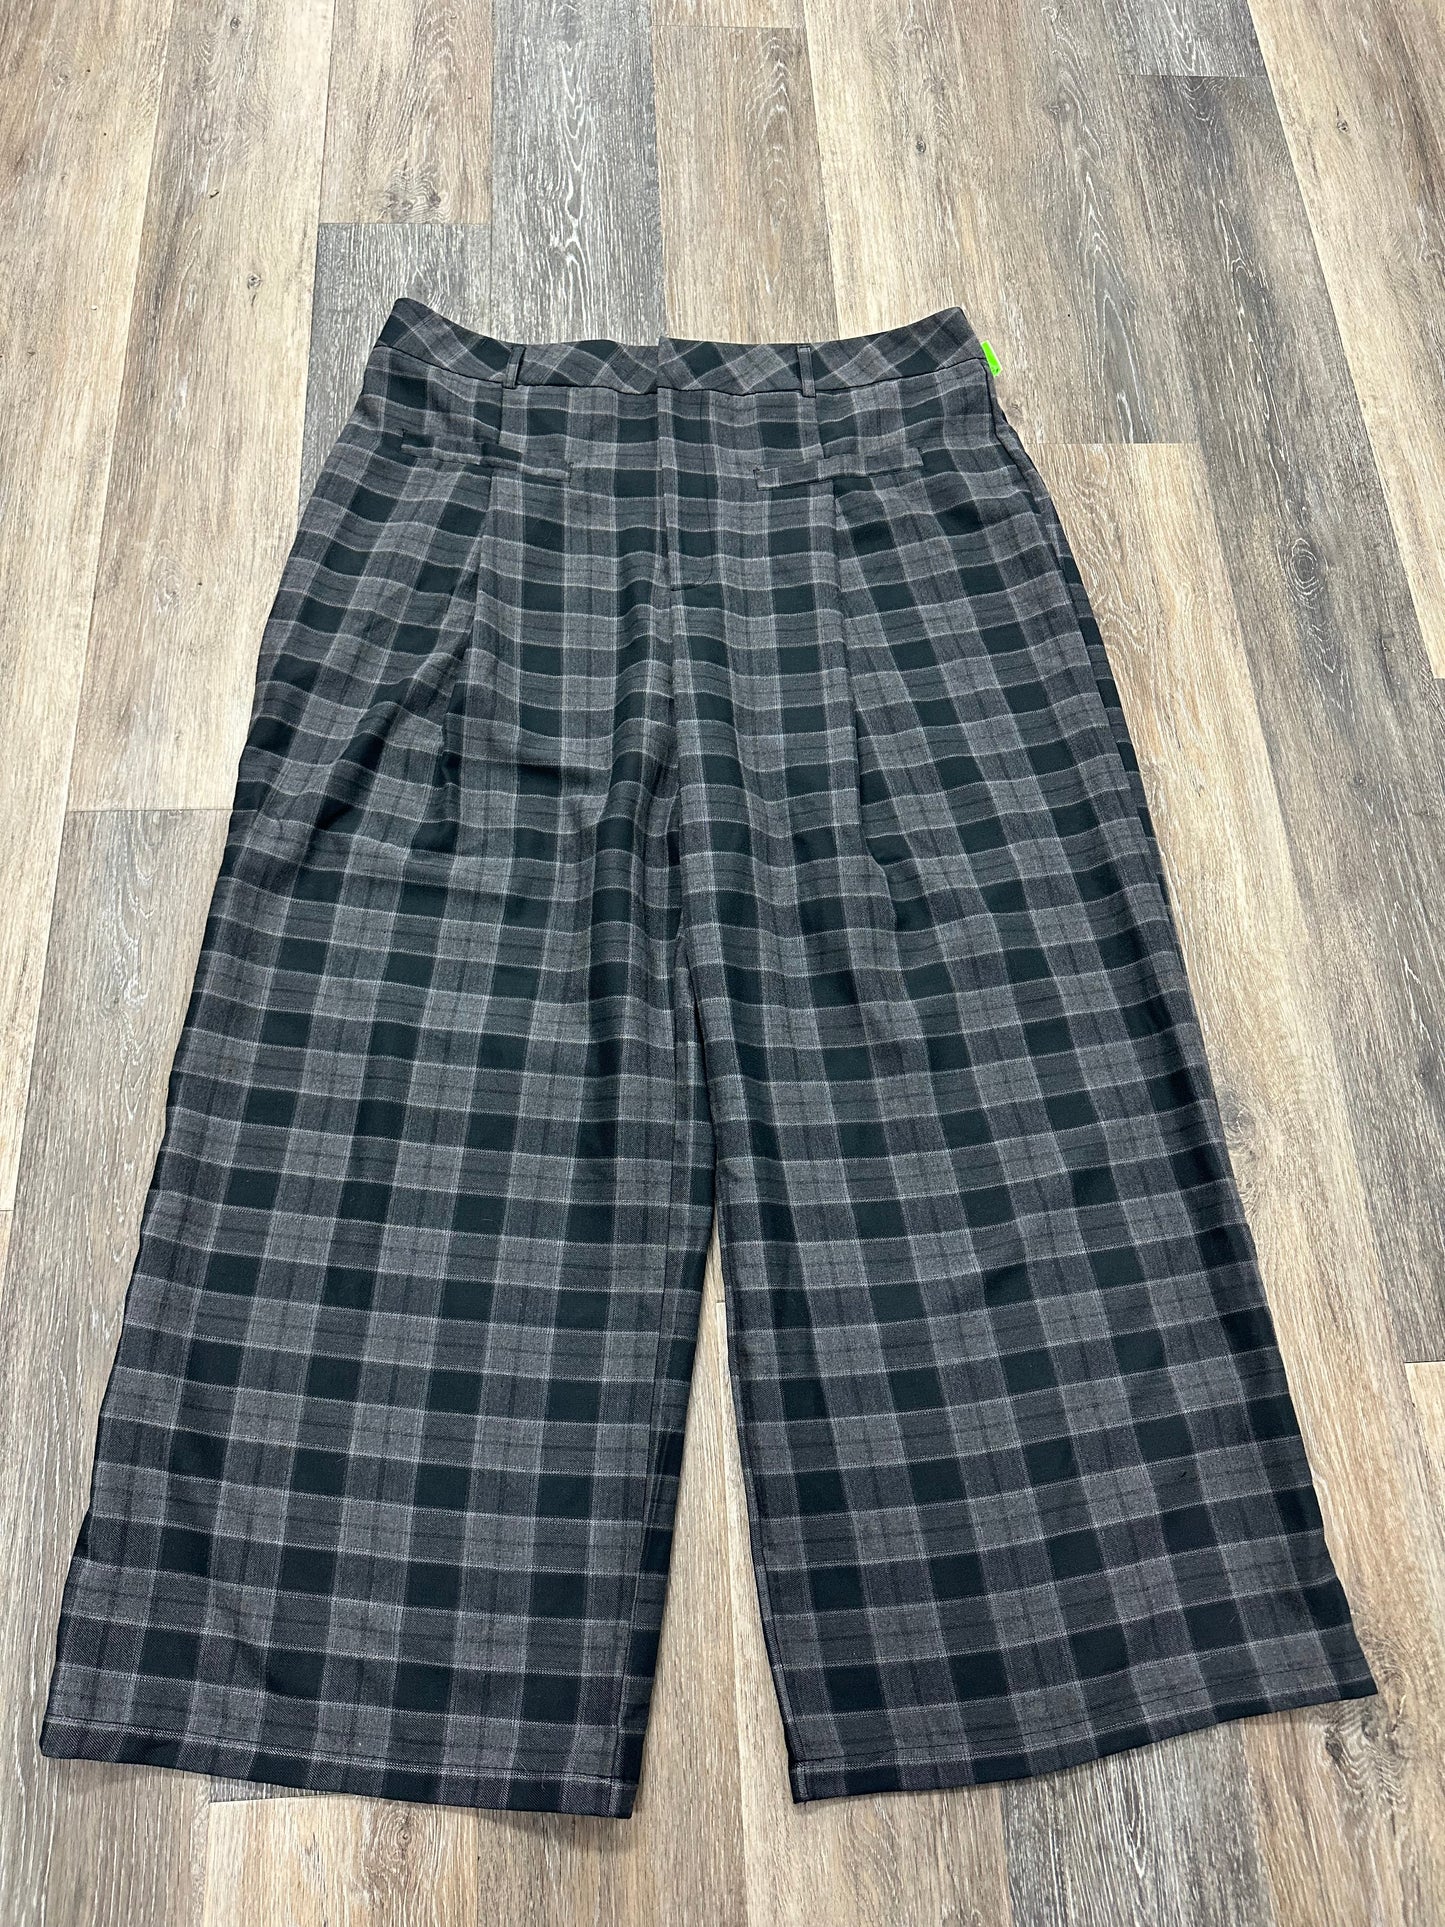 Pants Ankle By Cider  Size: 2x